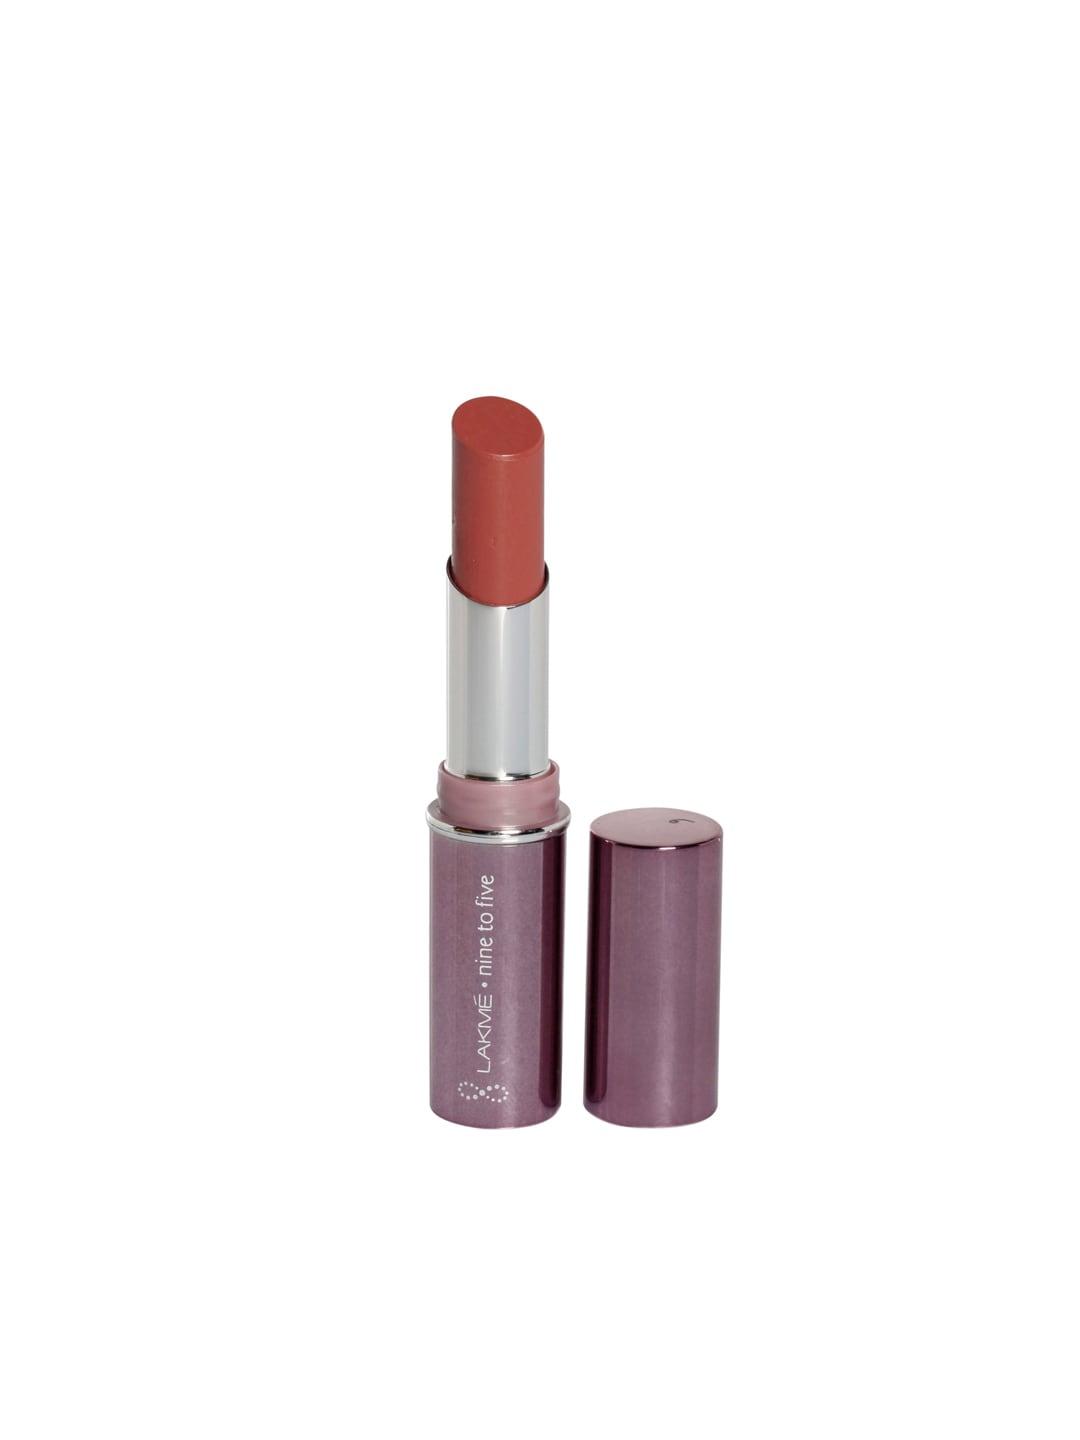 Lakme Nine to Five Day Apricot Nectar Lip Color